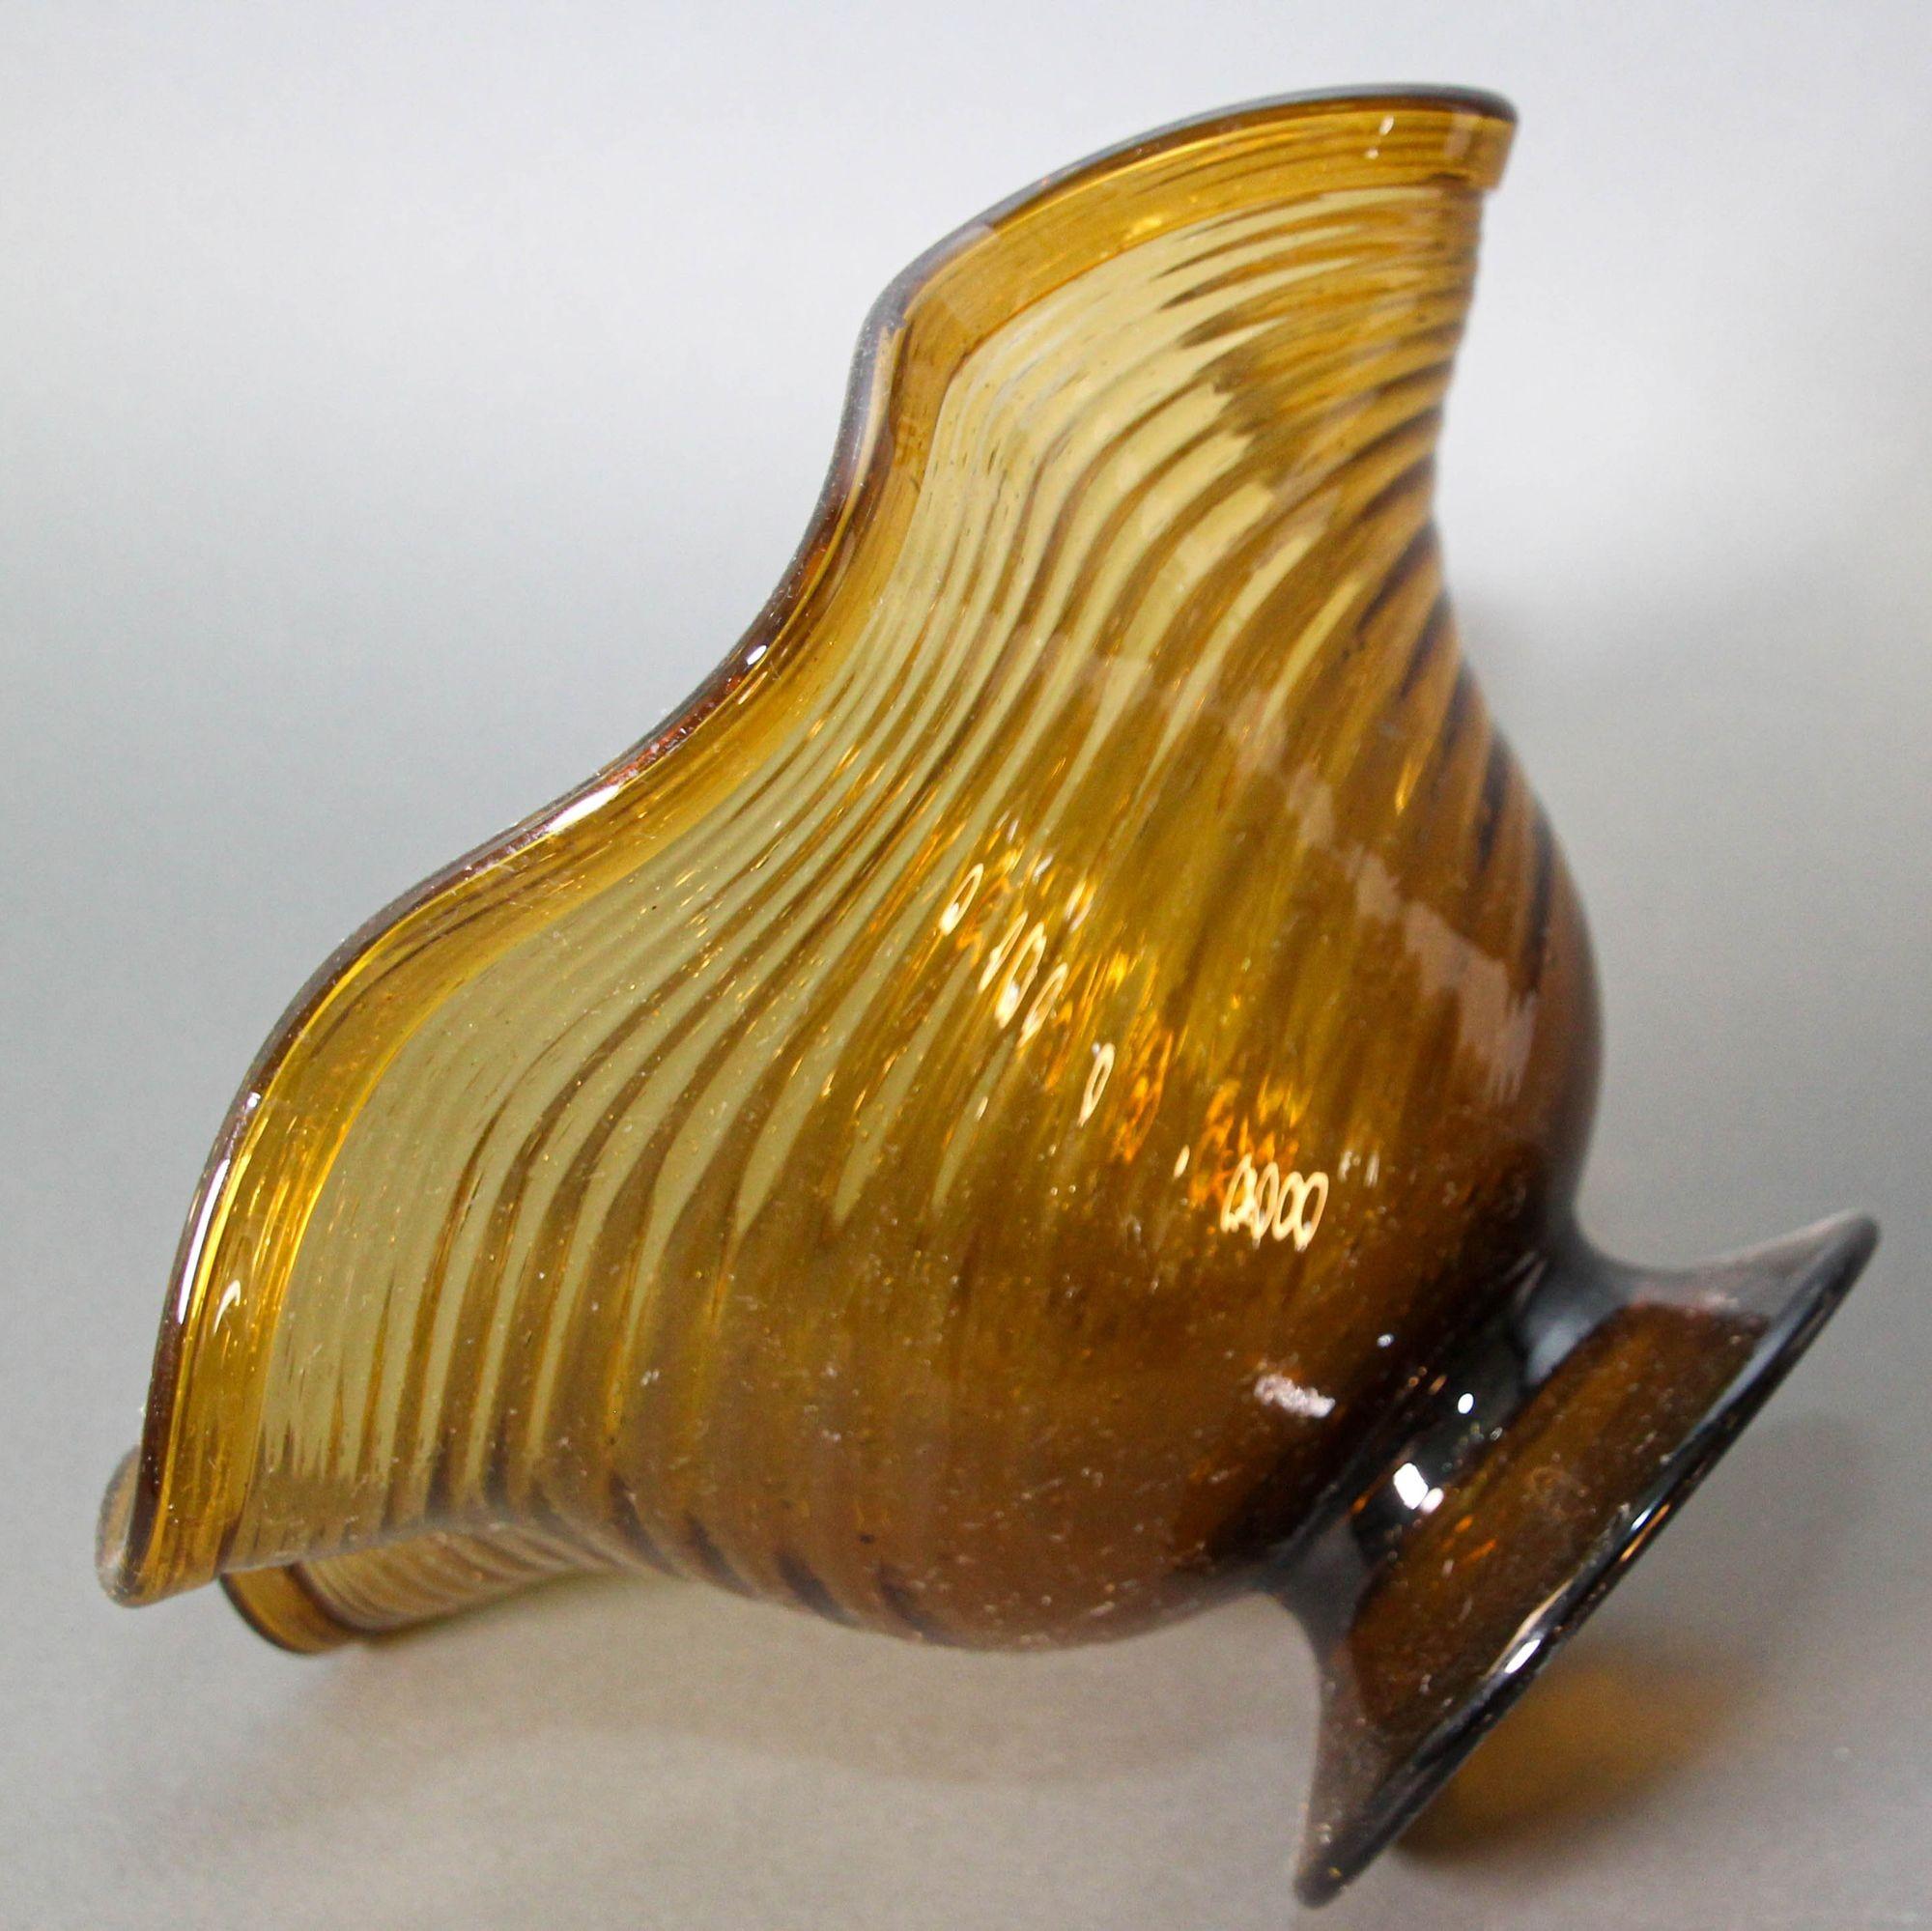 Vintage Amber Murano Art Glass Decorative Footed Fruit Bowl 1960s Italy For Sale 2